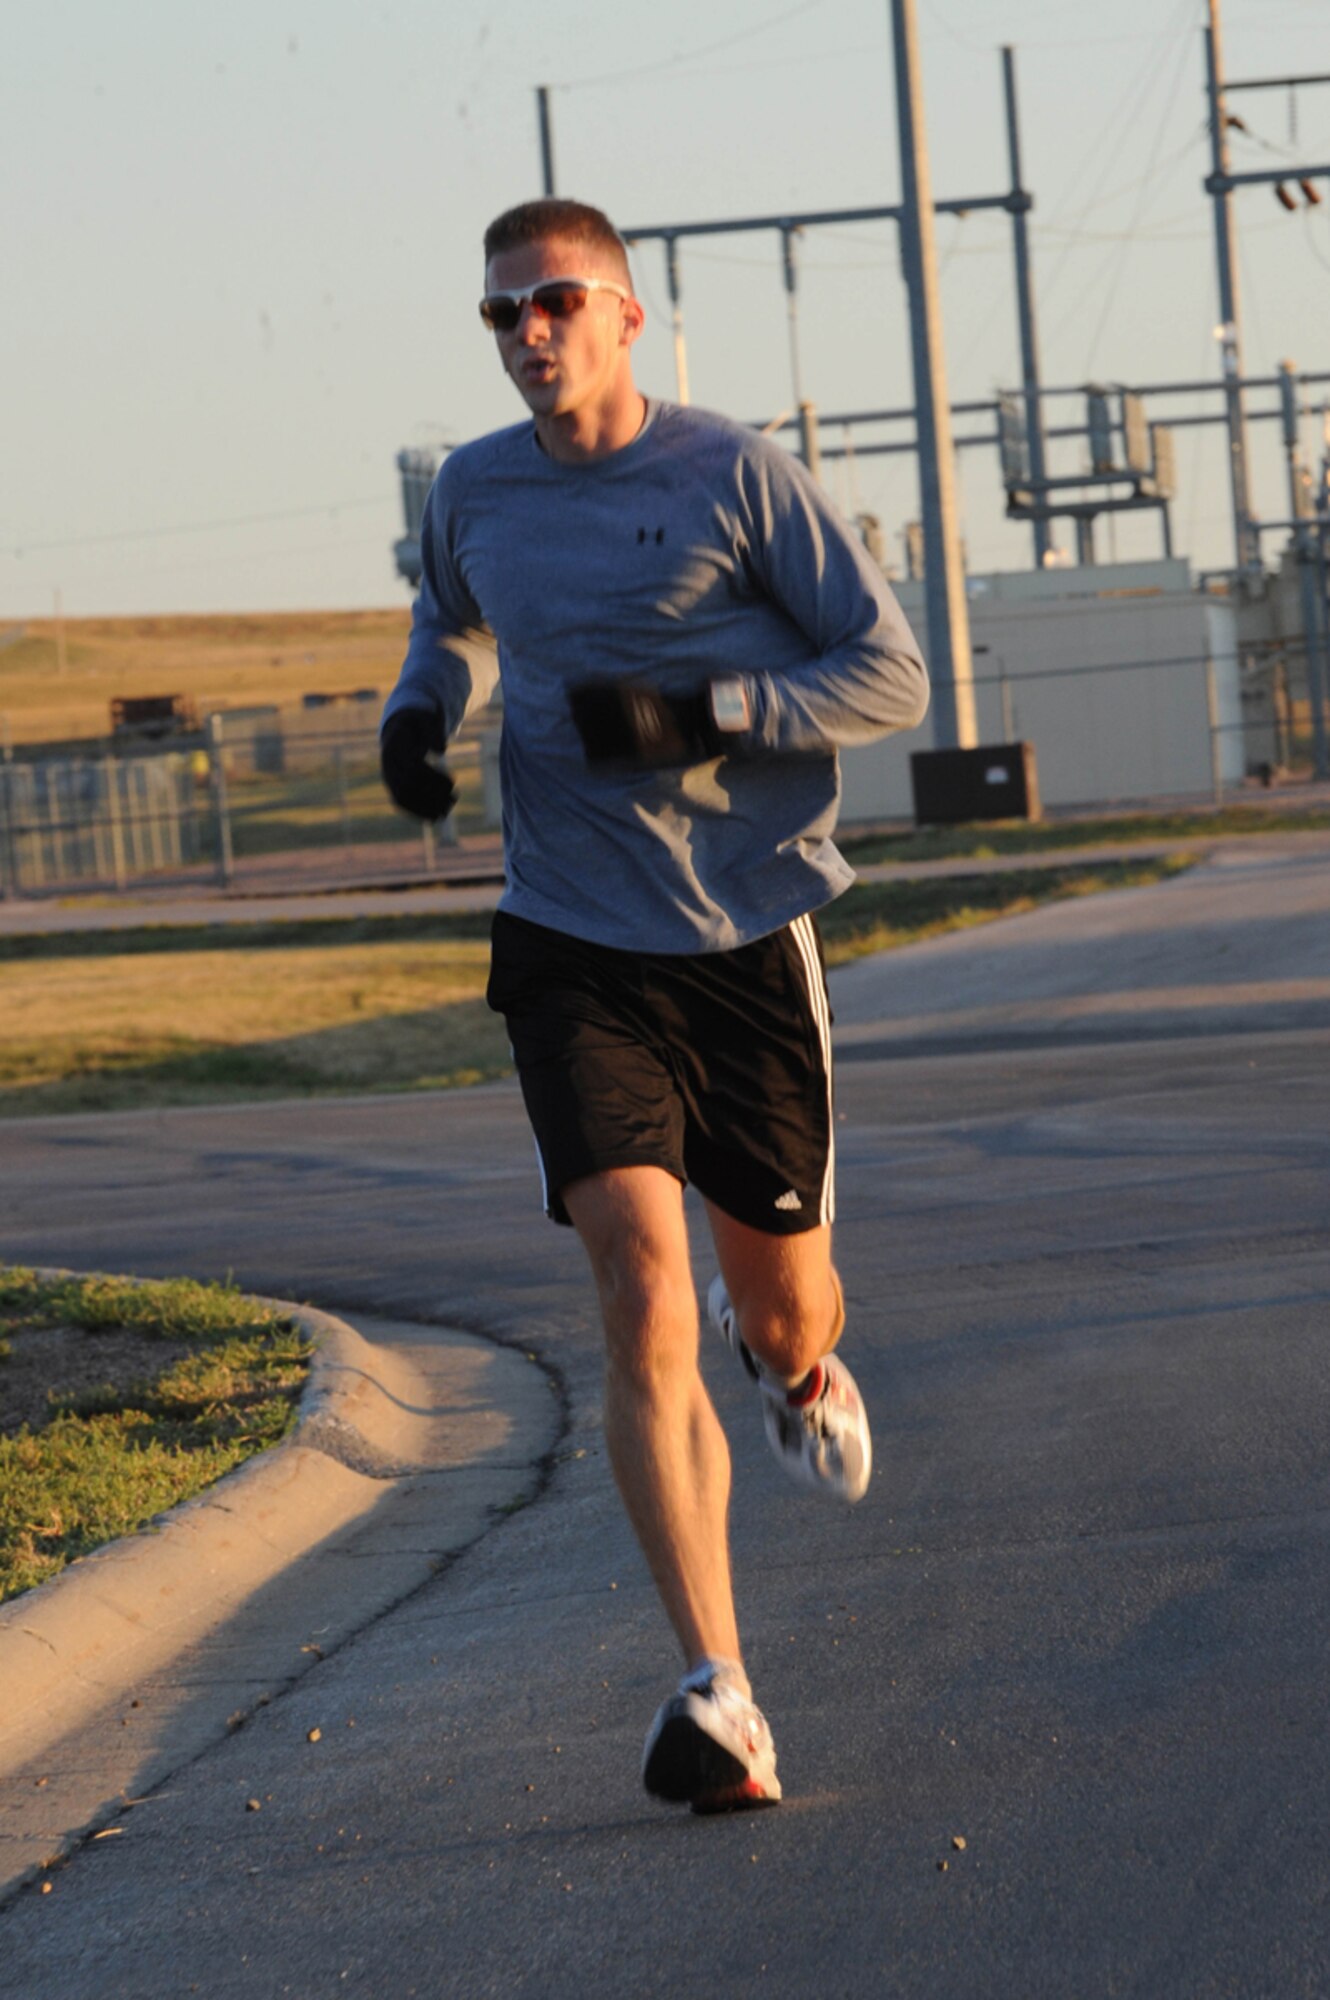 Capt. Edward Rozak, 28th Operations Support Squadron weather flight commander, runs in the Labor Day 5K run here, Sept. 5. Out of forty participants, Captain Rozak won the event with a time of 19 minutes, 29 seconds. (U.S. Air Force photo/Airman 1st Class Adam Grant)

